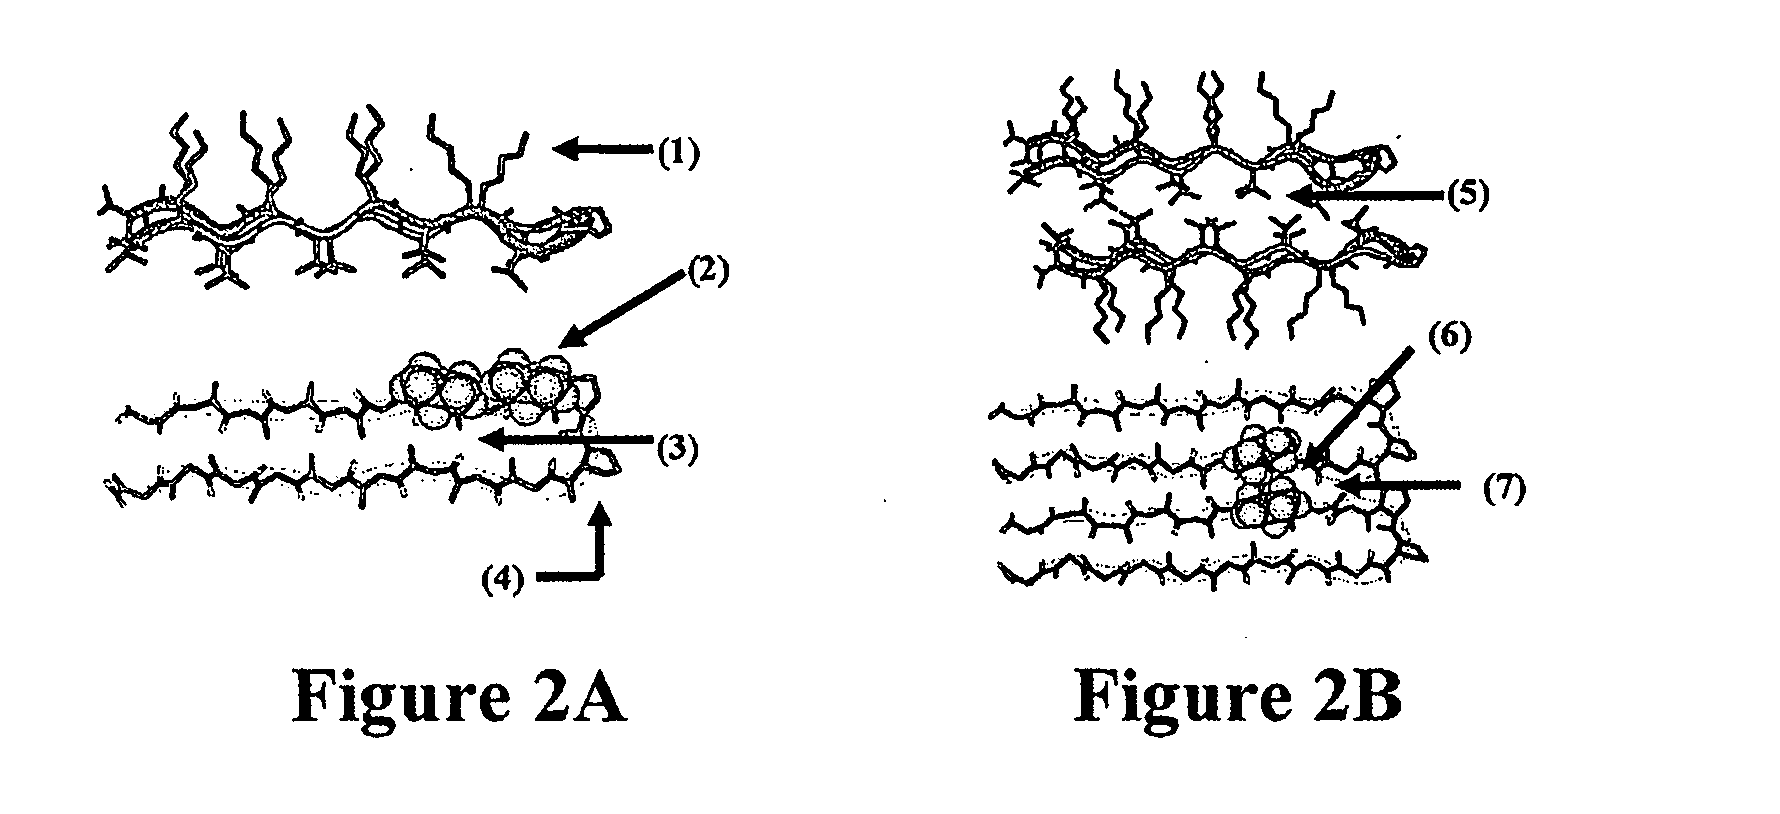 Novel hydorgels and uses thereof